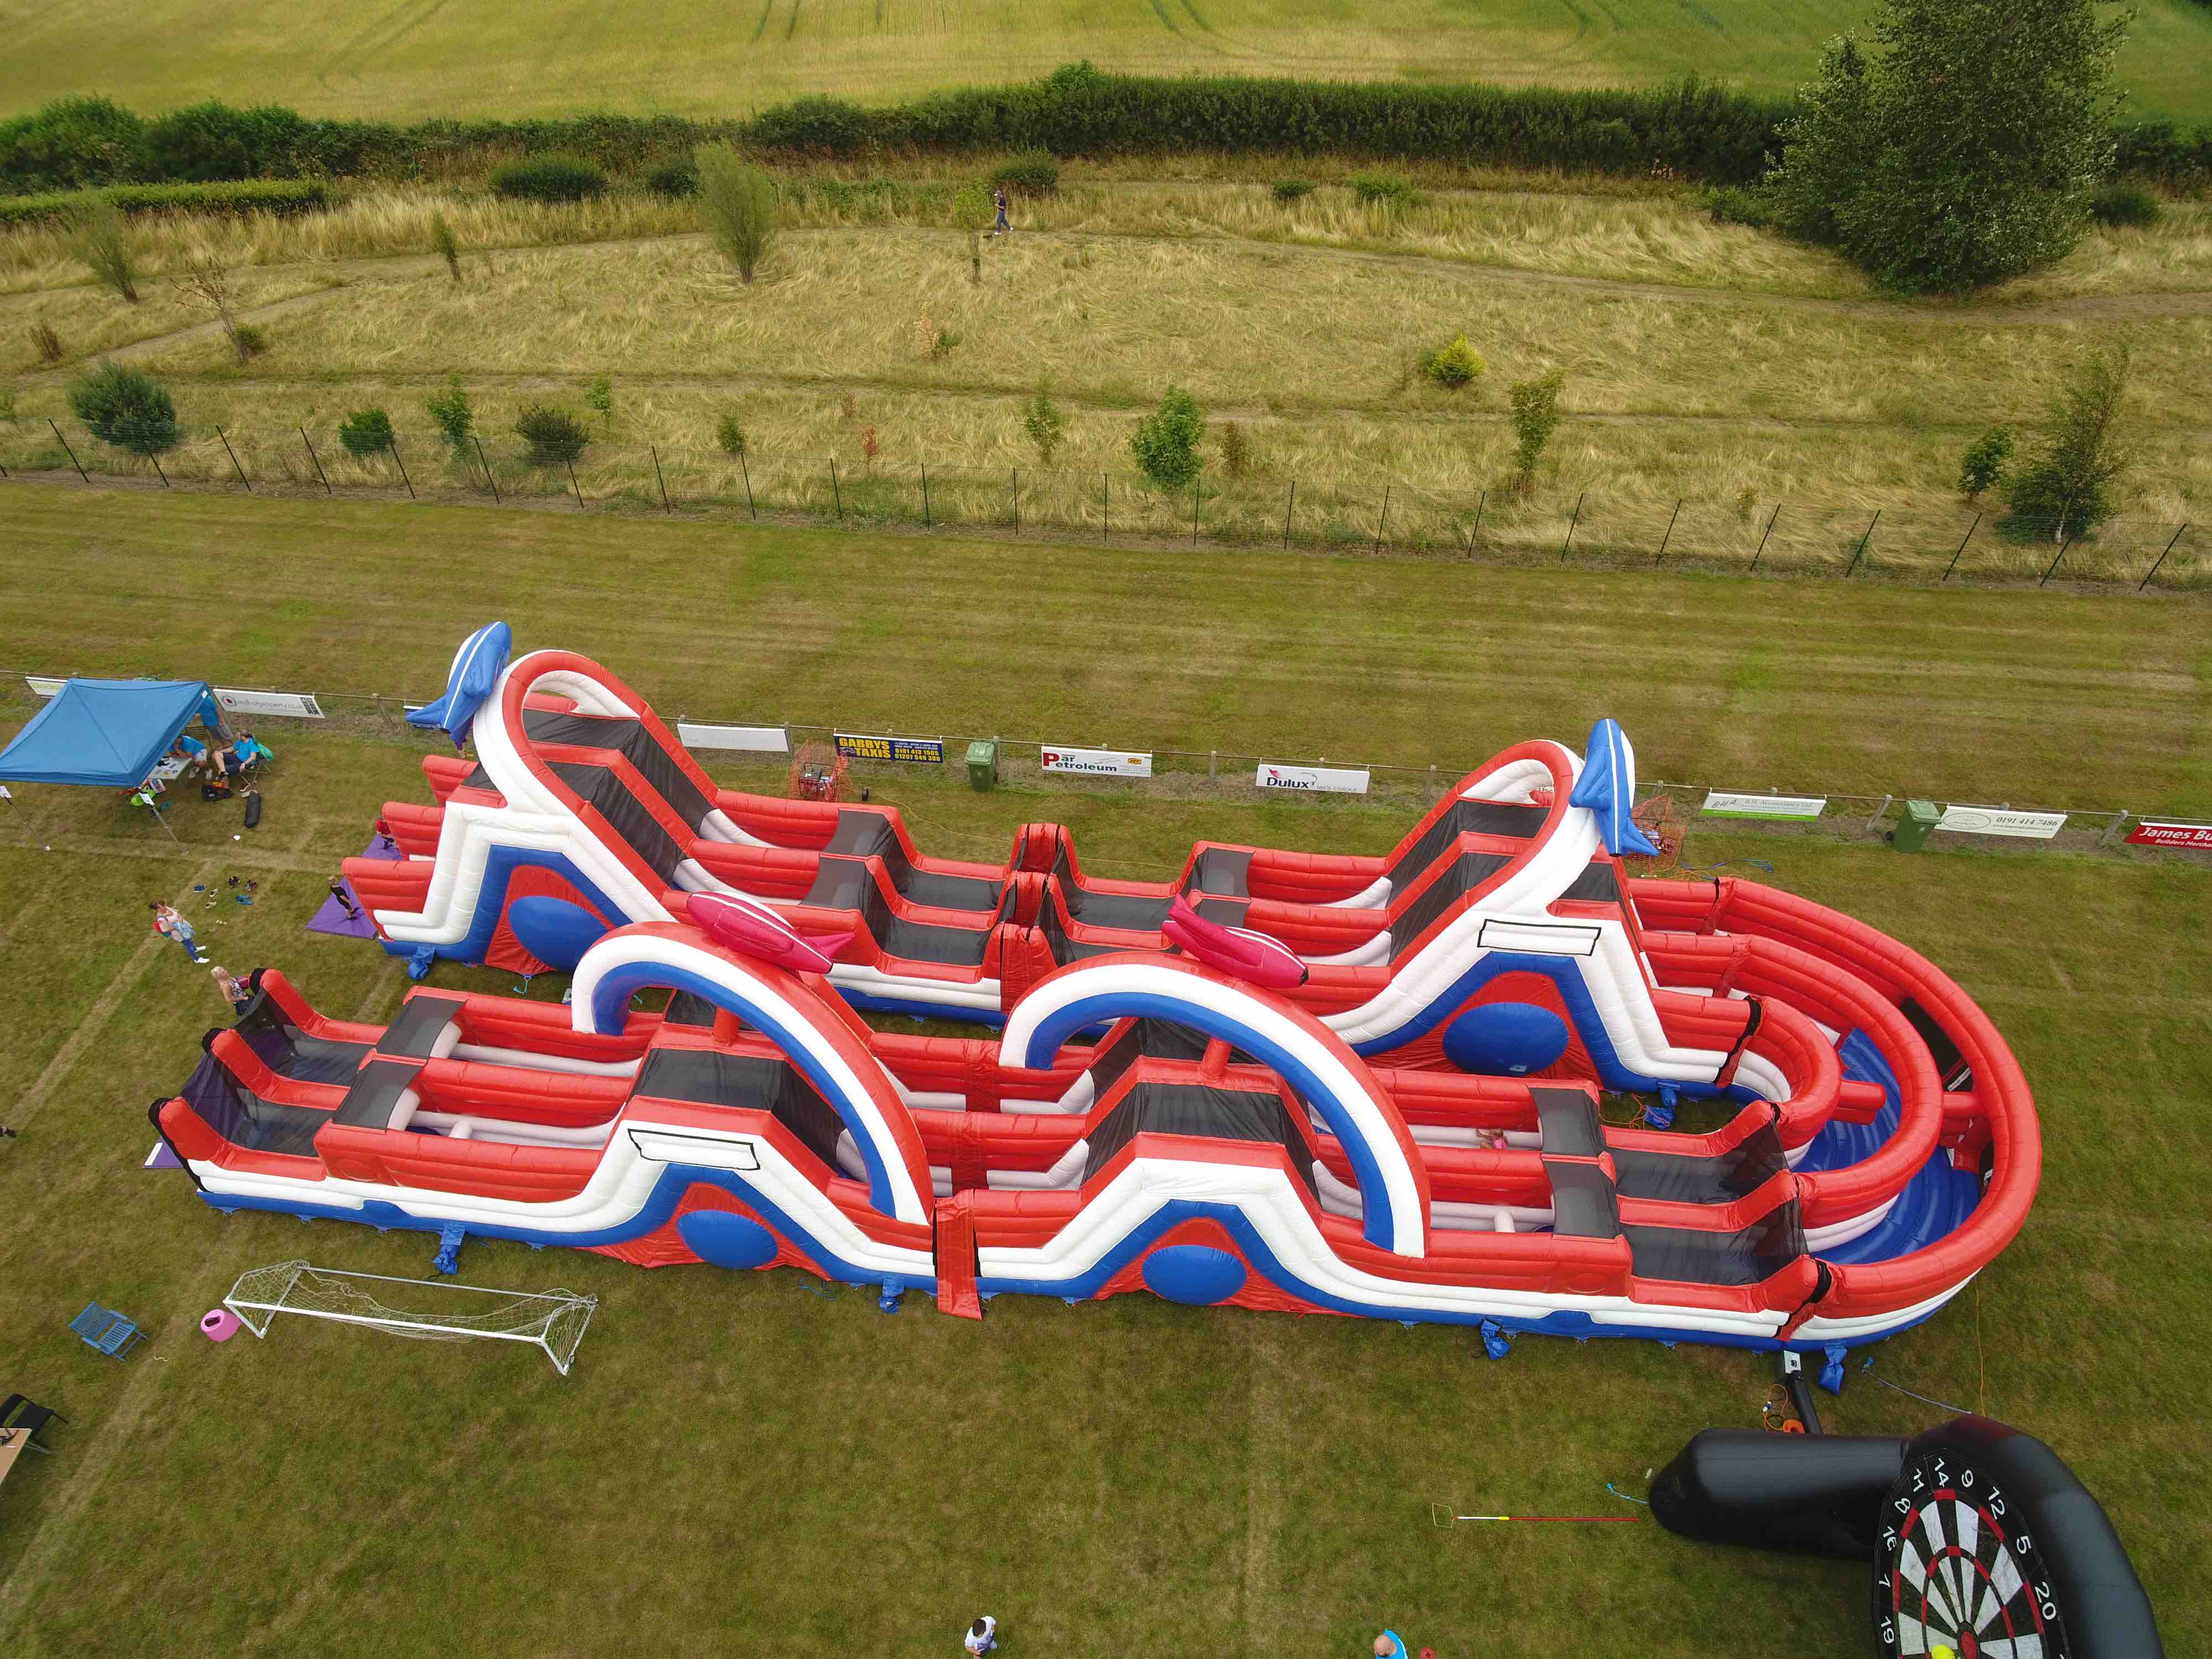 Giant 220ft inflatable assault / obstacle course